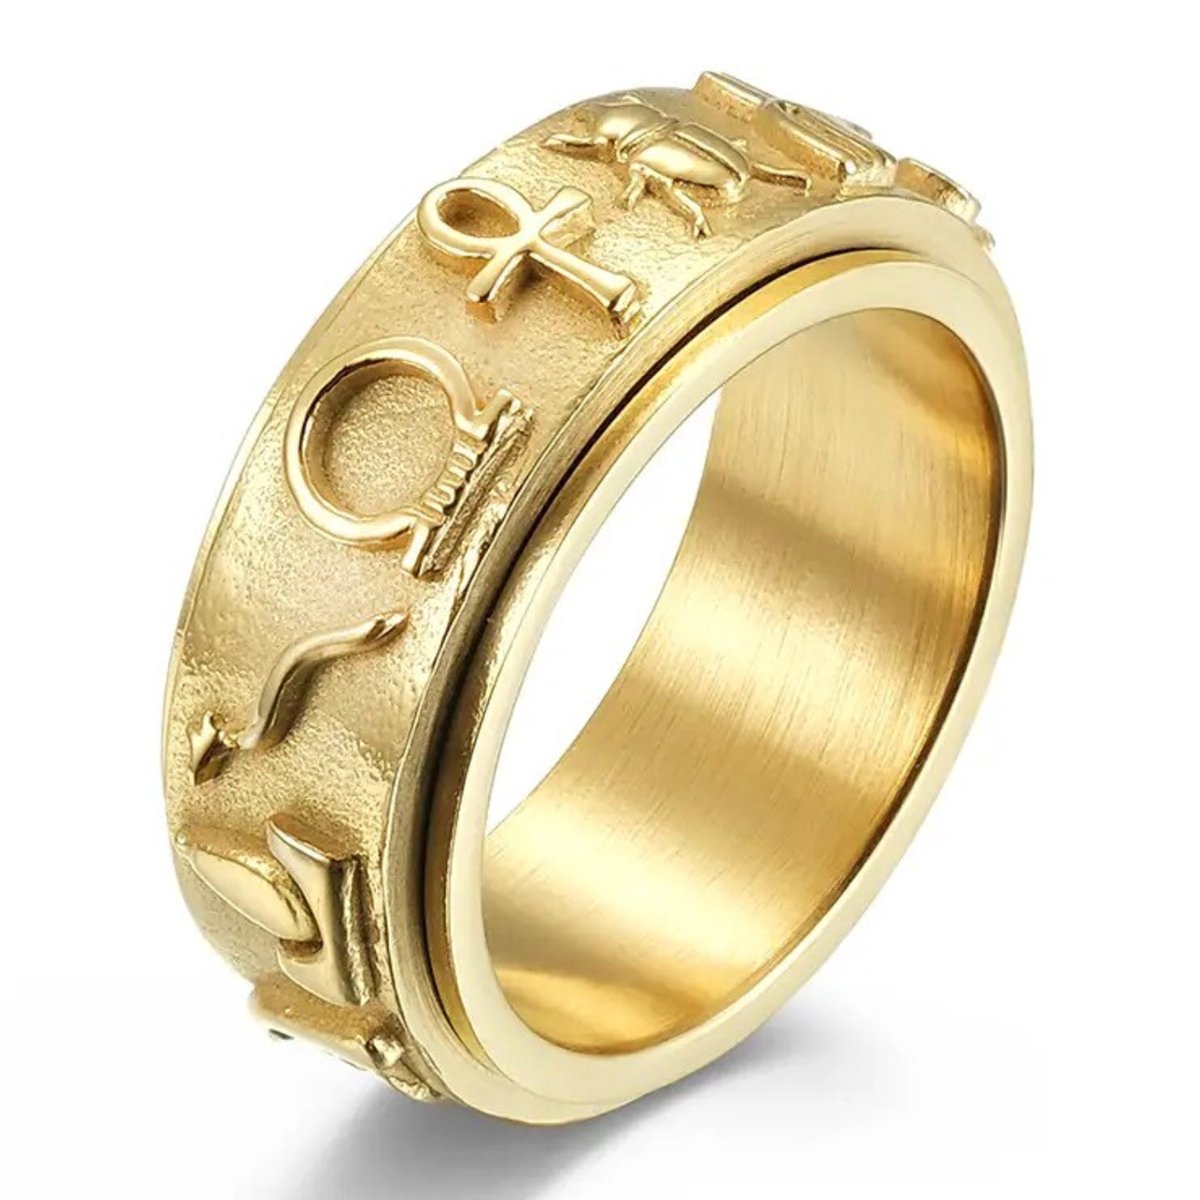 Anxiety Ring - (Egypte) - Stress Ring - Fidget Ring - Anxiety Ring For Finger - Draaibare Ring - Spinning Ring - Goud - (16.50 mm / maat 52)